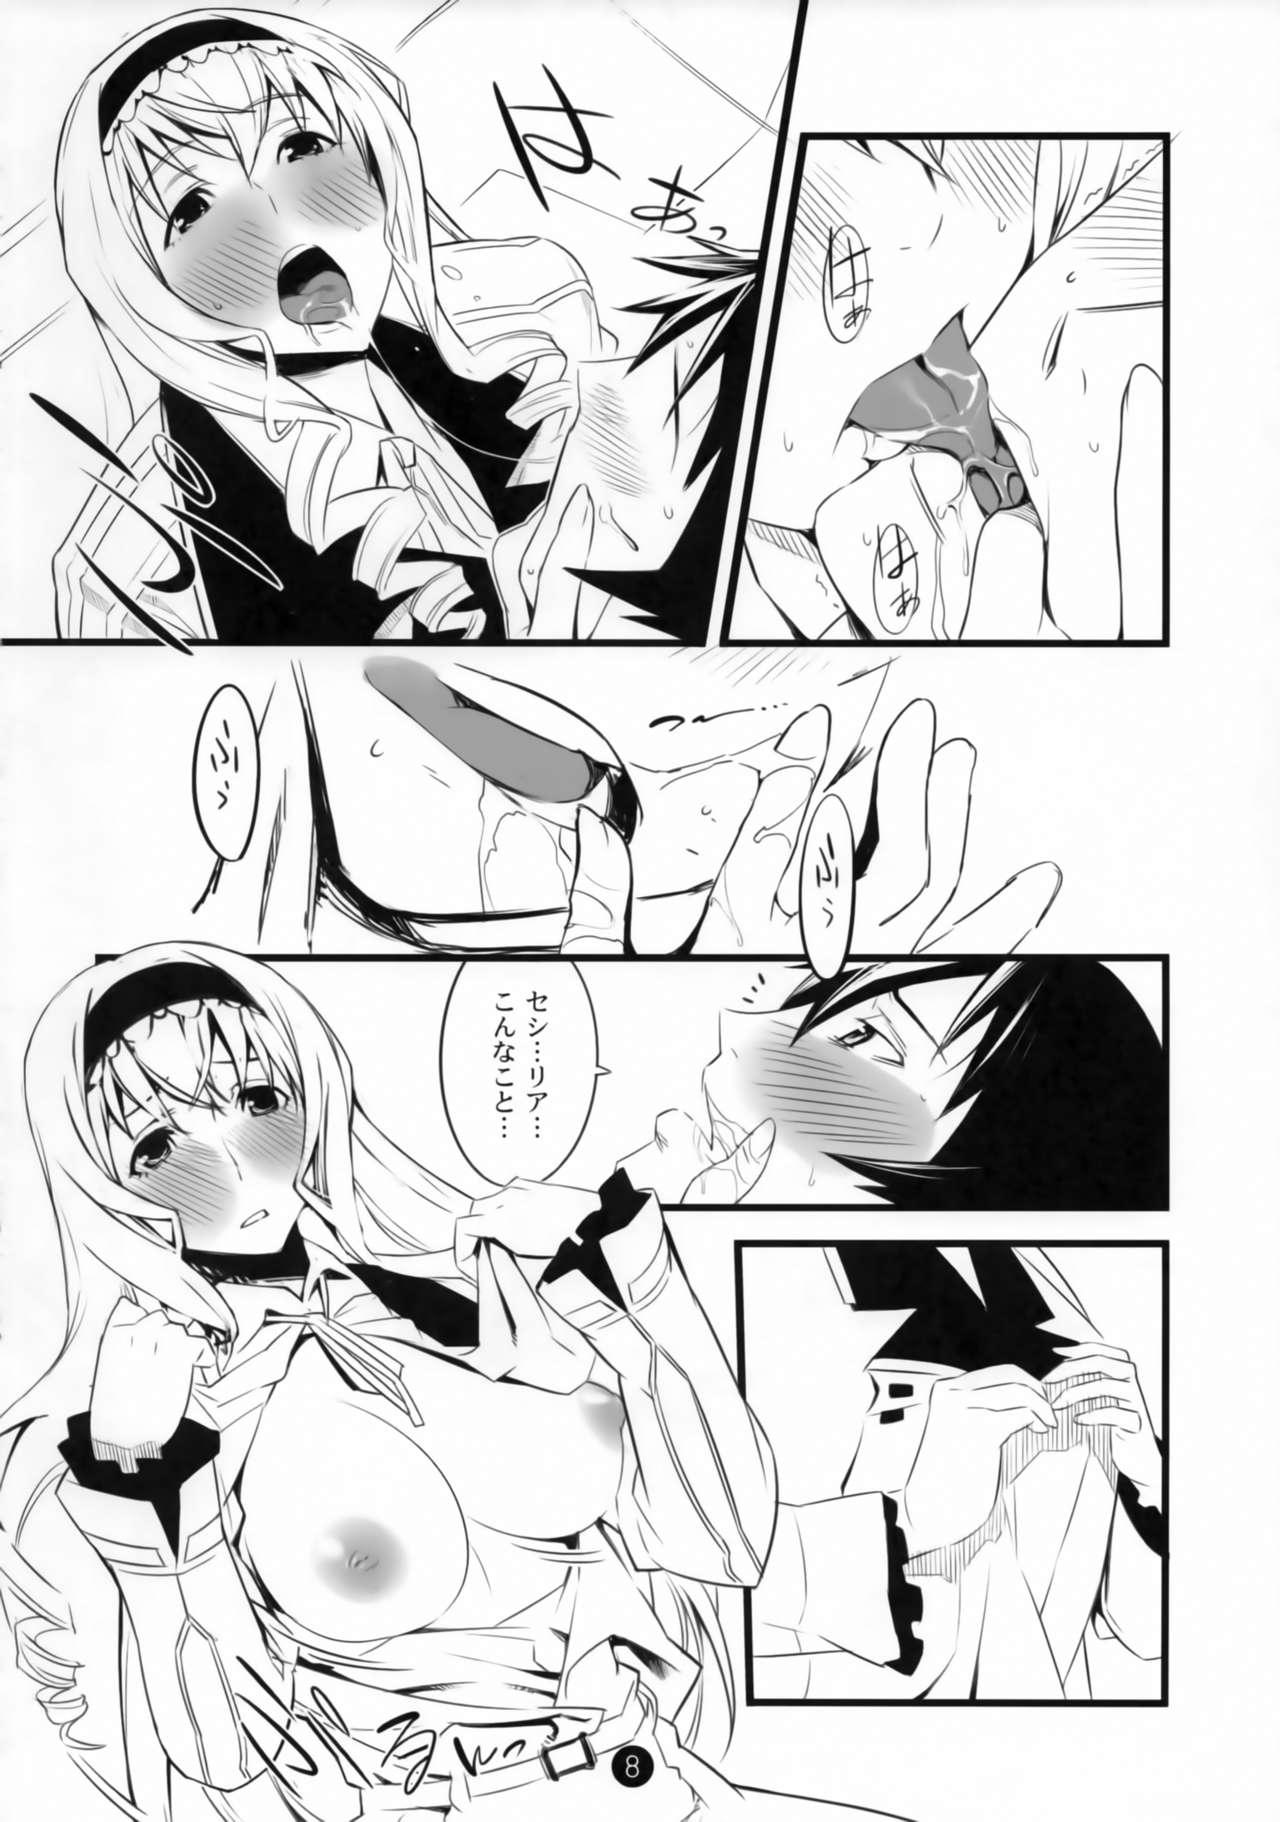 Awesome Summer Of Love - Infinite stratos Handjob - Page 9